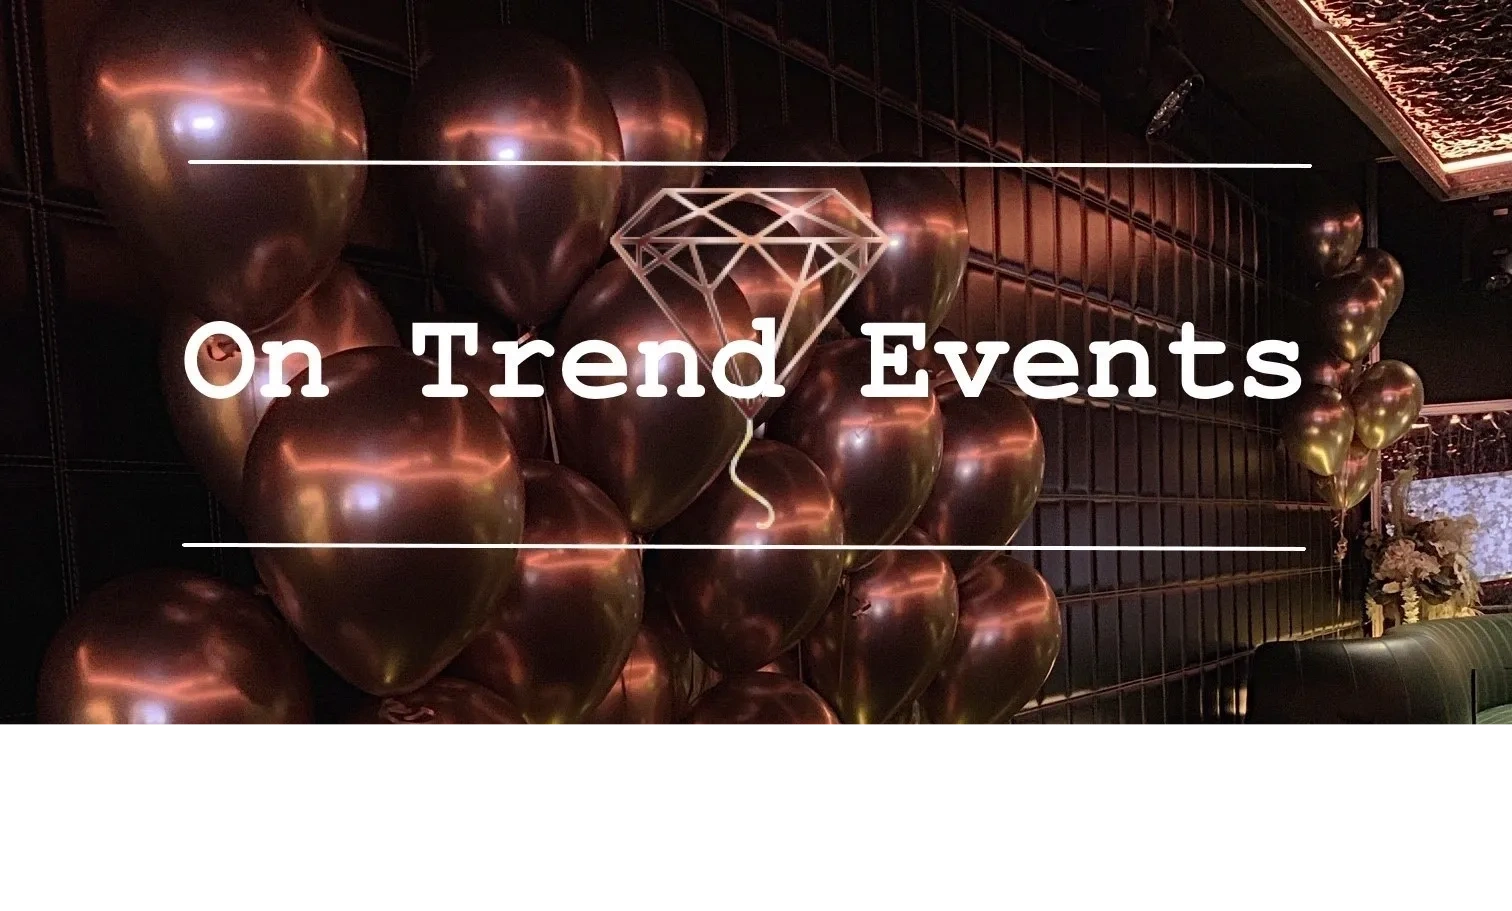 On Trend Events, Event décor, party supplies, balloons, East Melbourne party hire.